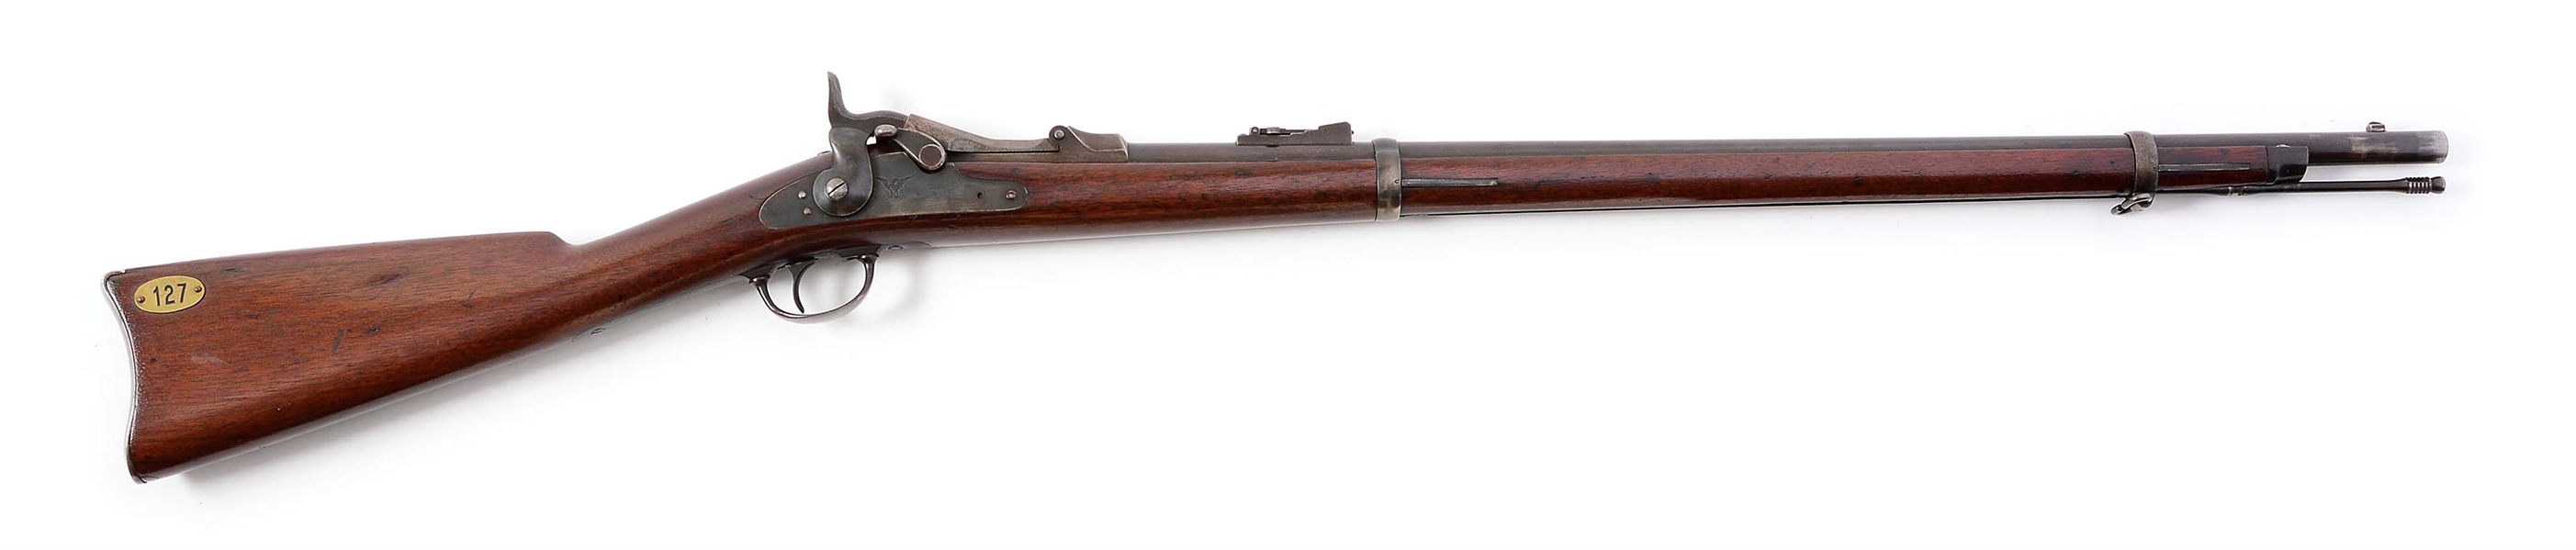 (A) U.S. MODEL 1873 TRAPDOOR CADET RIFLE BY SPRINGFIELD.